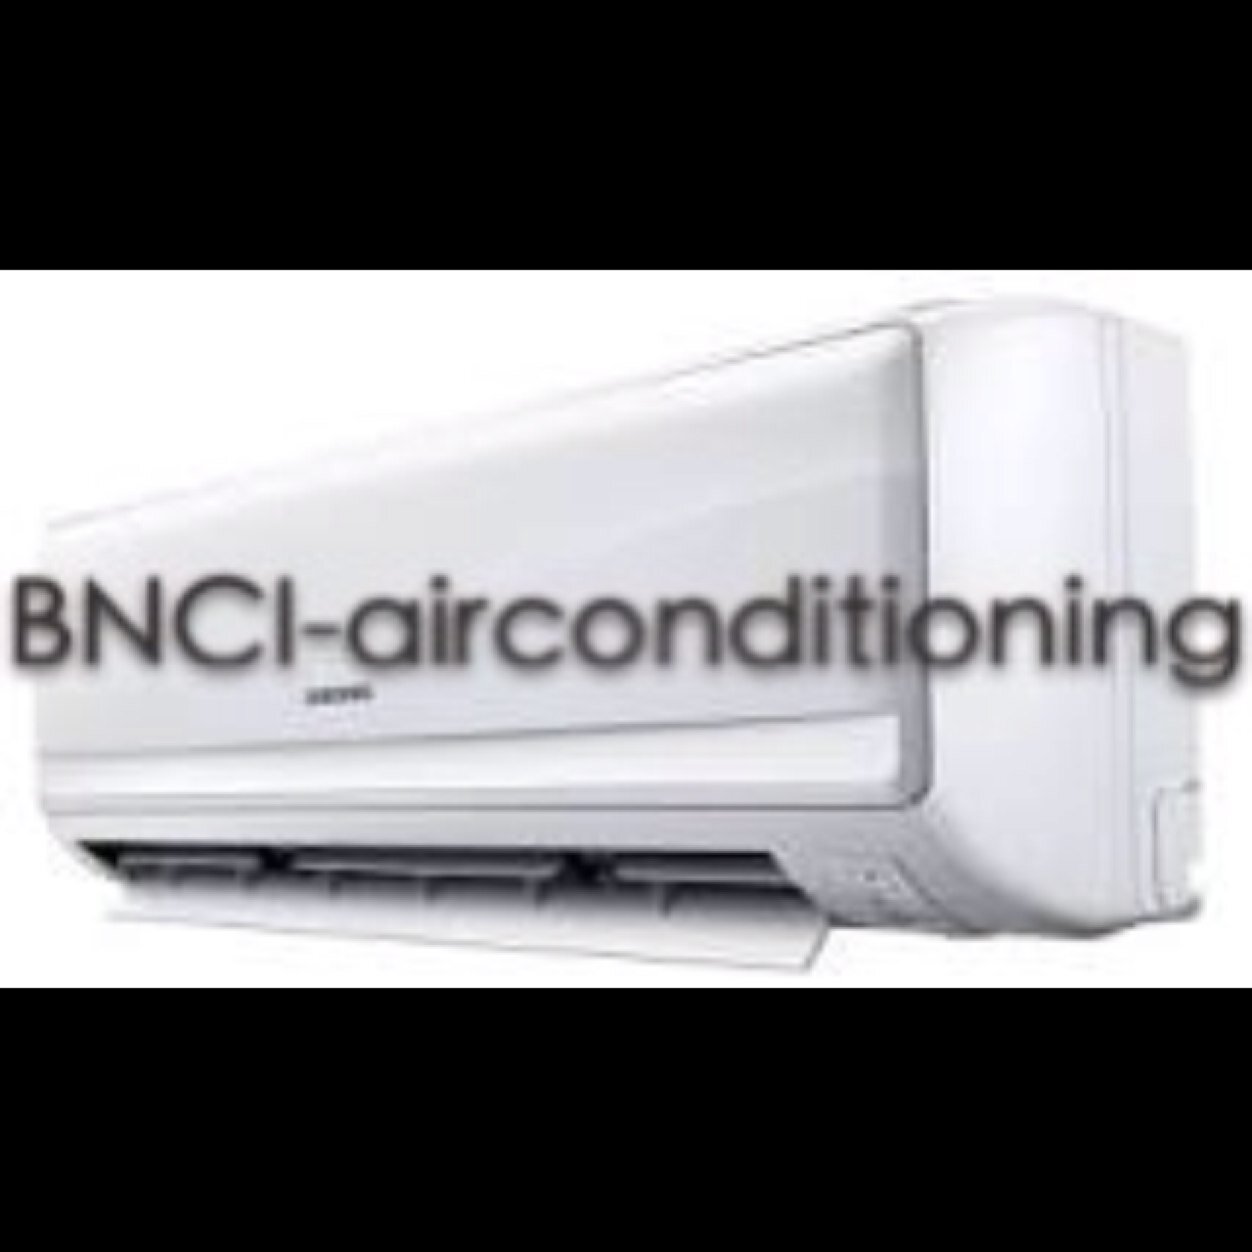 BNCI-AIRCONDITIONA TEL:+(65)86726386
We offer all types of cleaning services and air-cleaning solution. Wash syrup on top of a small  S$35.